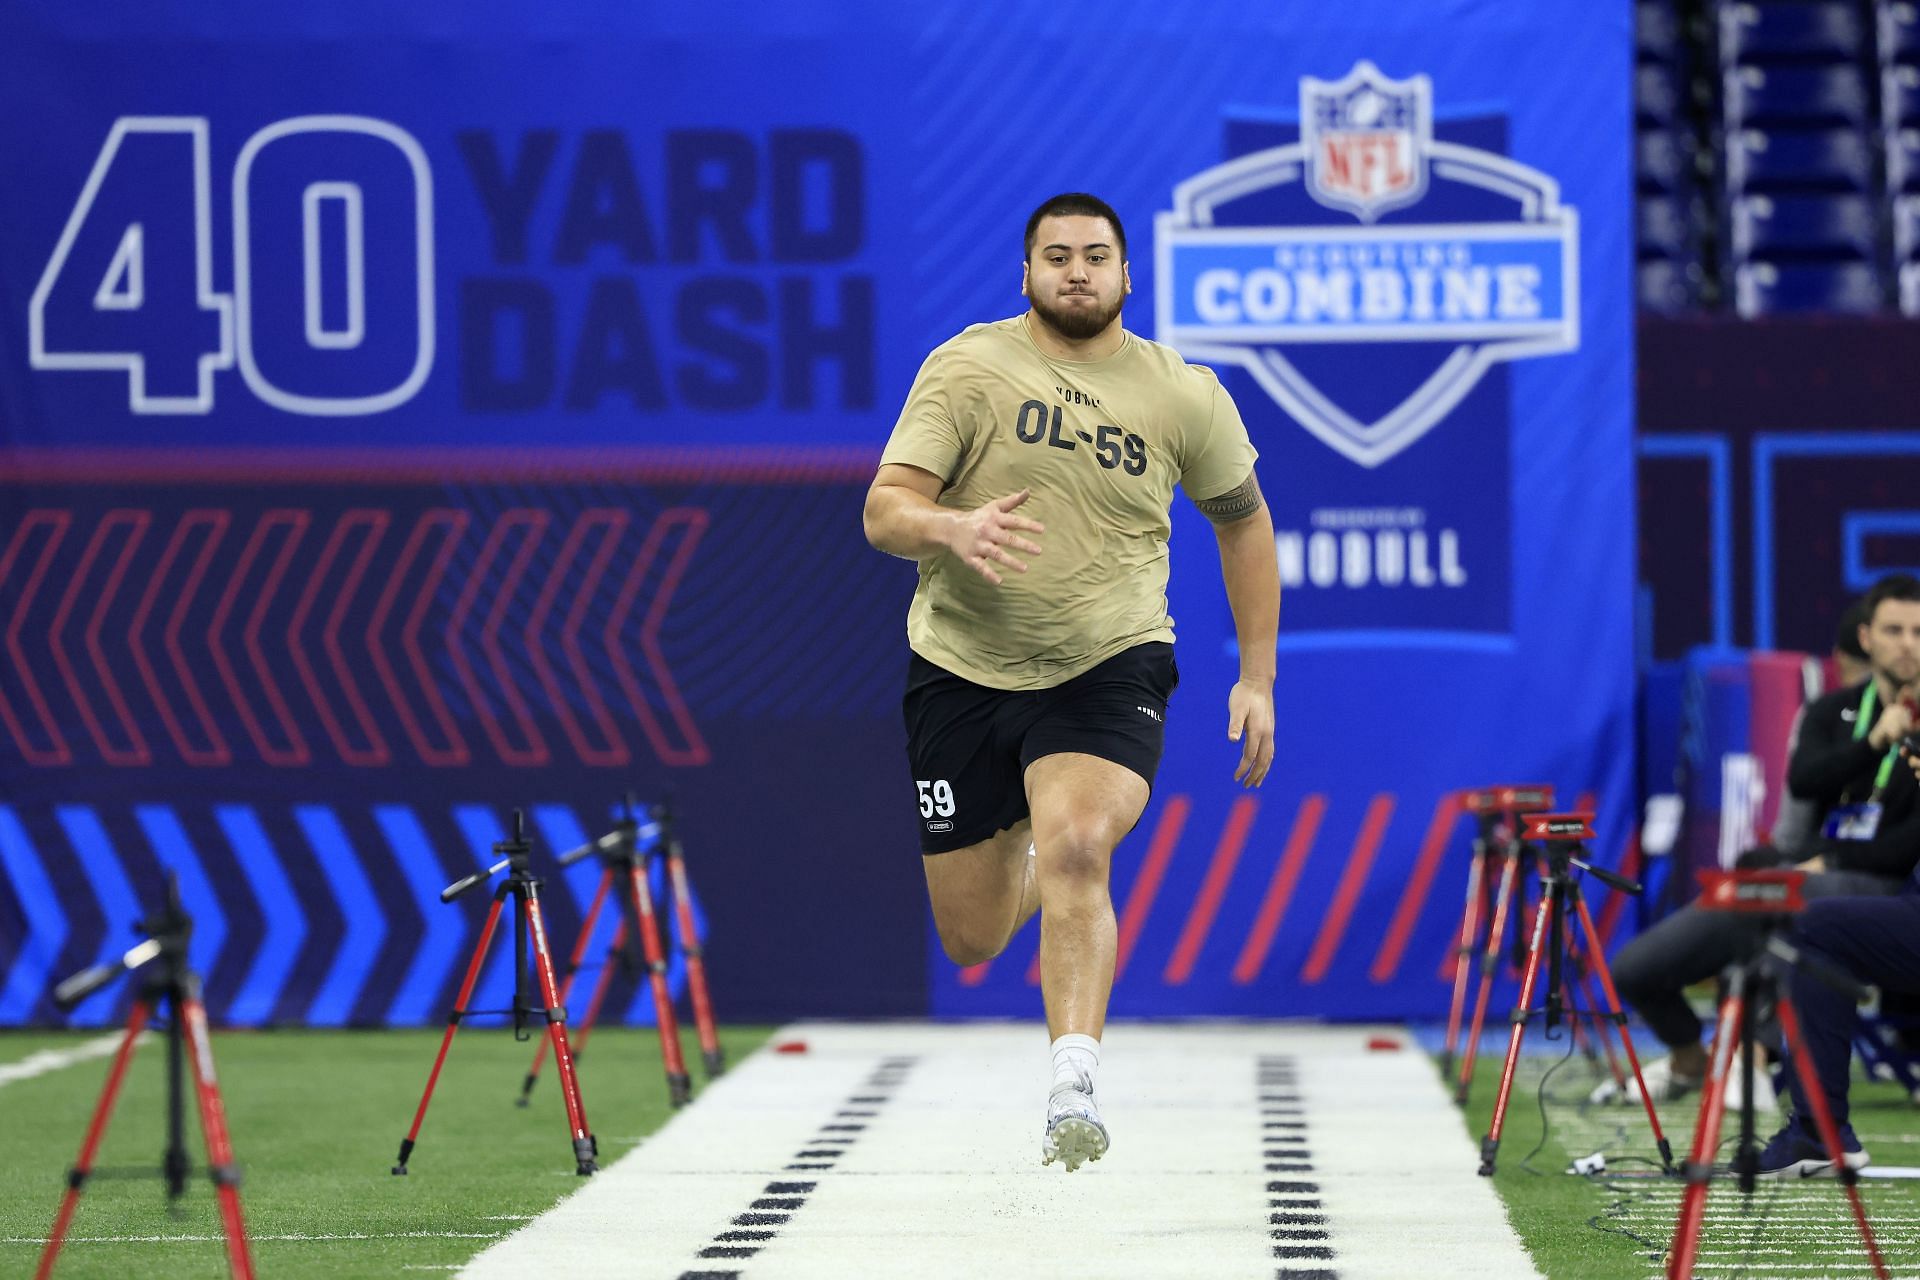 Dominick Puni #OL59 of Kansas participates in the 40-yard dash during the NFL Combine